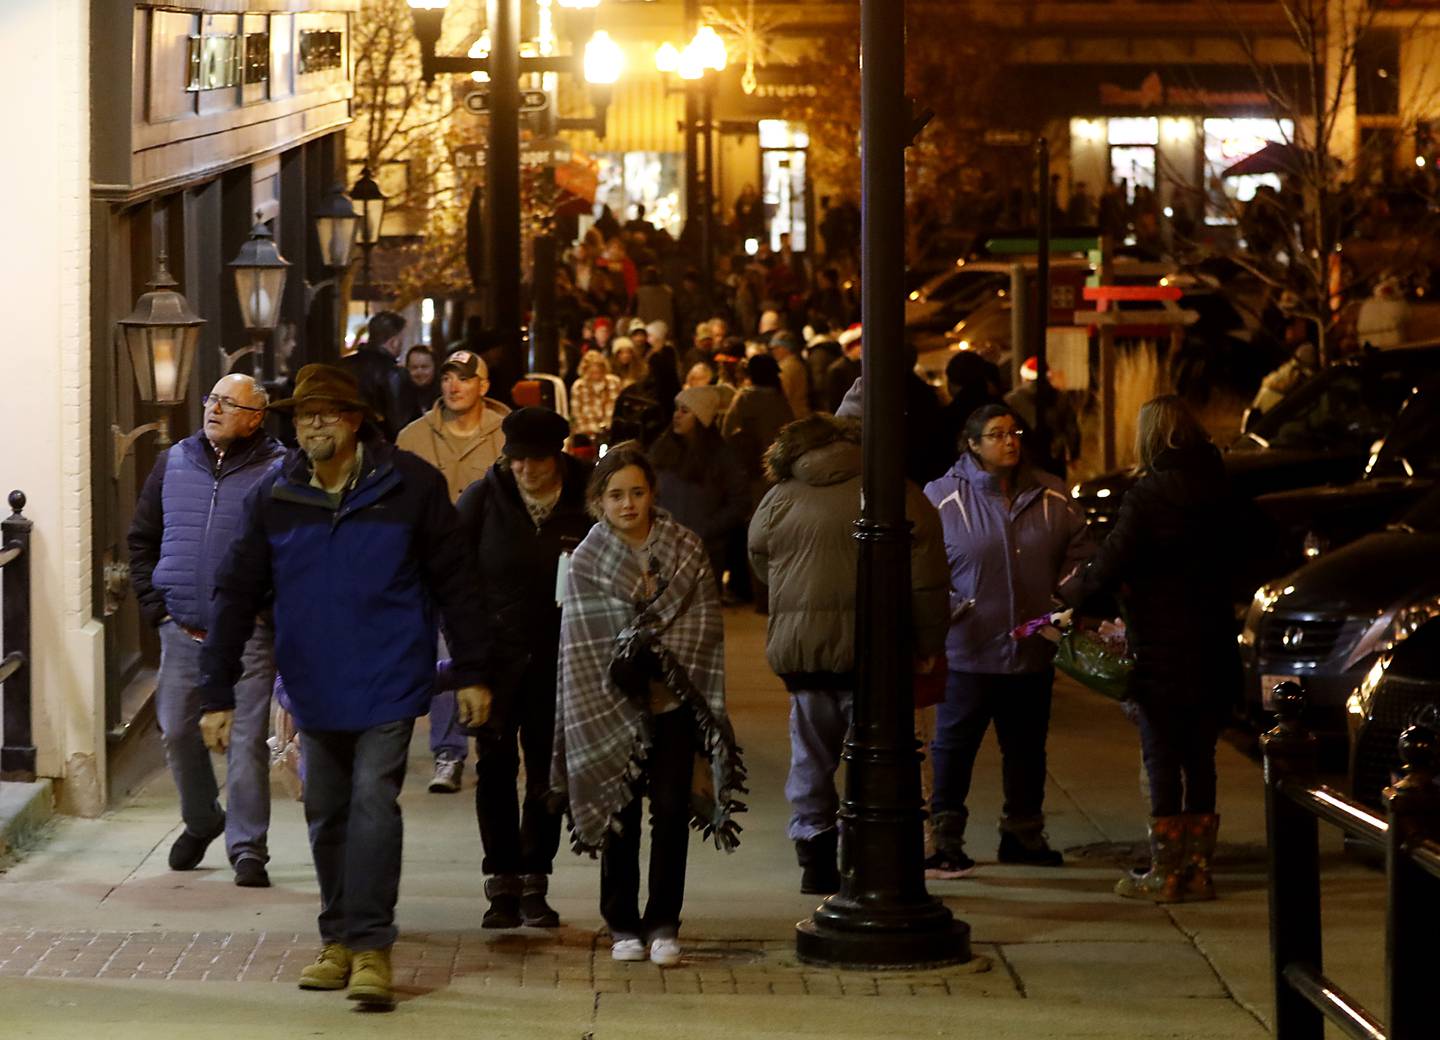 People walk around the Square during the Lighting of the Square Friday, Nov. 25, 2022, in Woodstock. The annual event featured brass music, caroling, free doughnuts and cider, food trucks, festive selfie stations and shopping